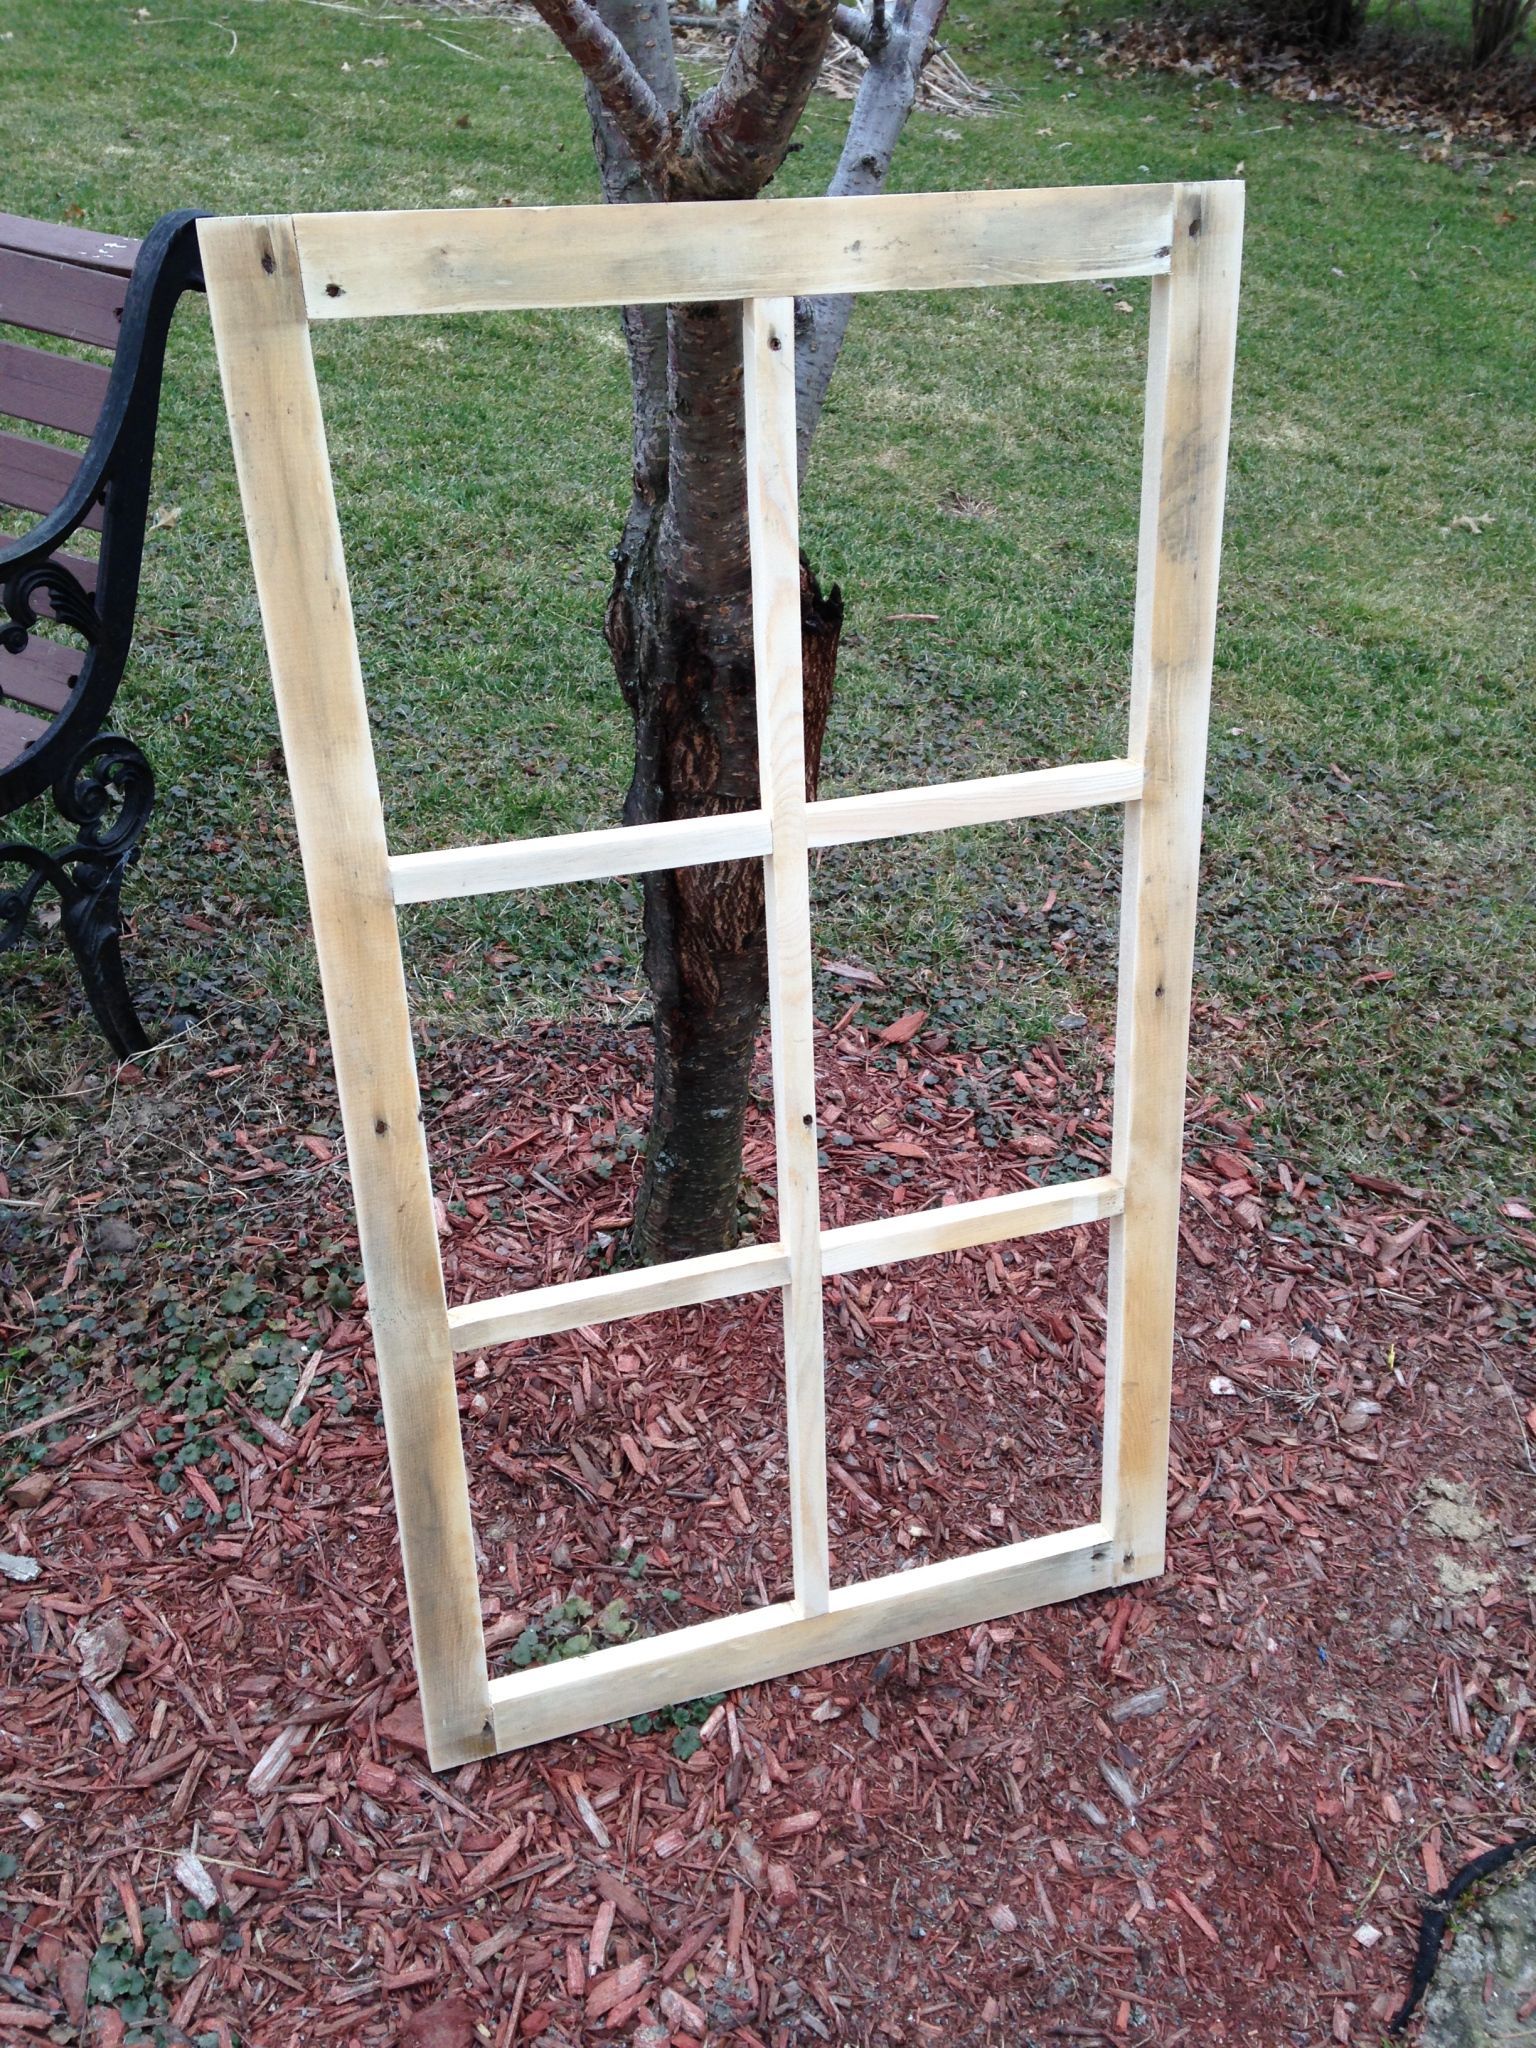 Old Antique Window Frame; DIY From Scrap Wood -   20 diy projects With Pallets old windows ideas